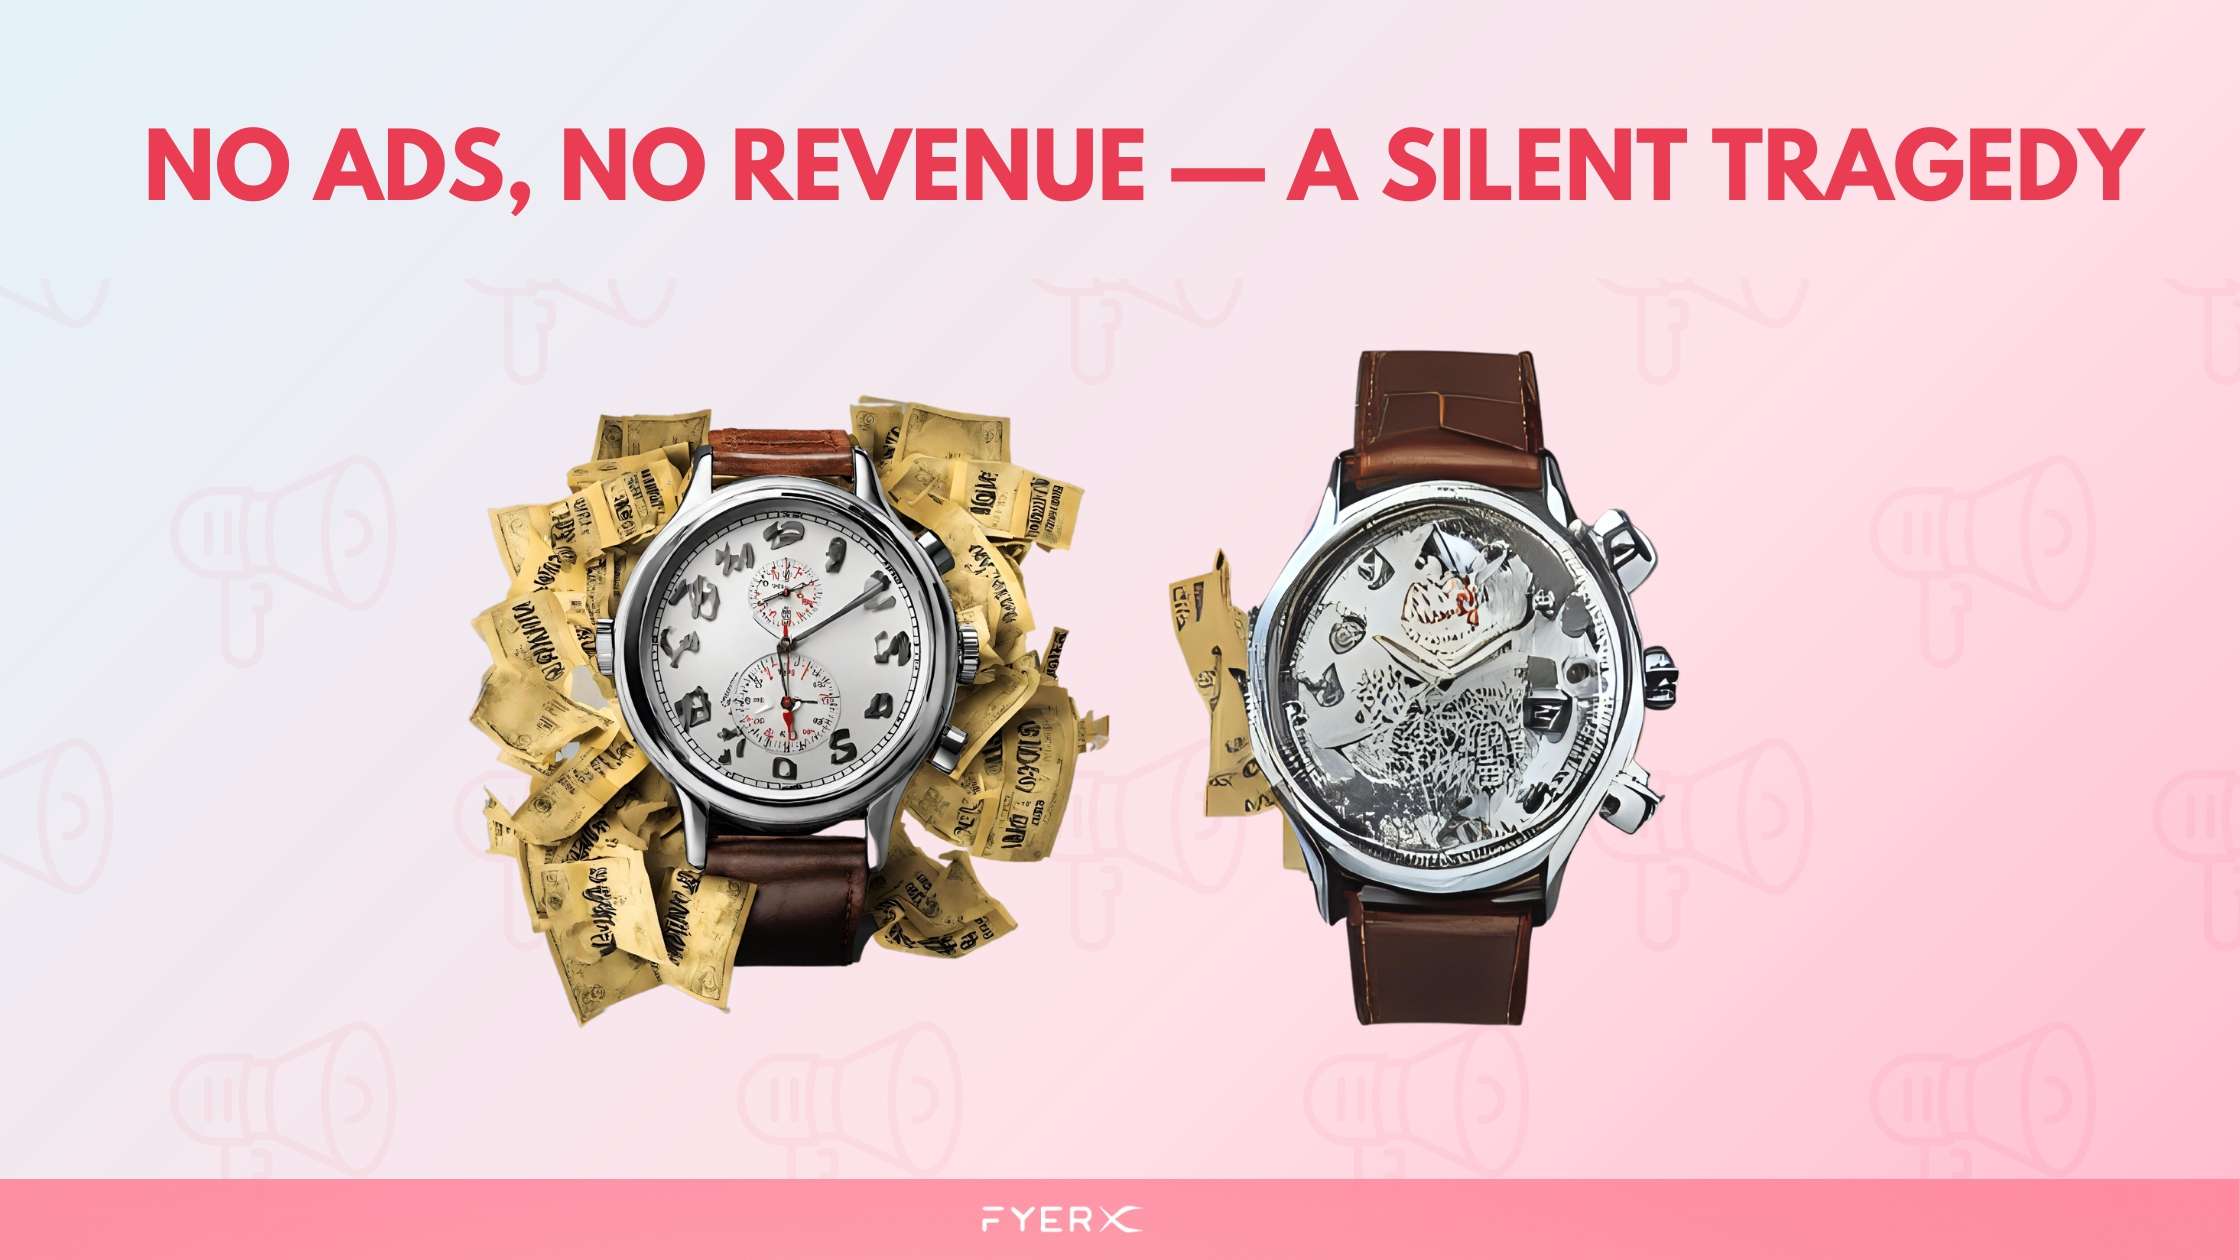 Stopping Advertising to Save Money is Like Stopping Your Watch to Save Time